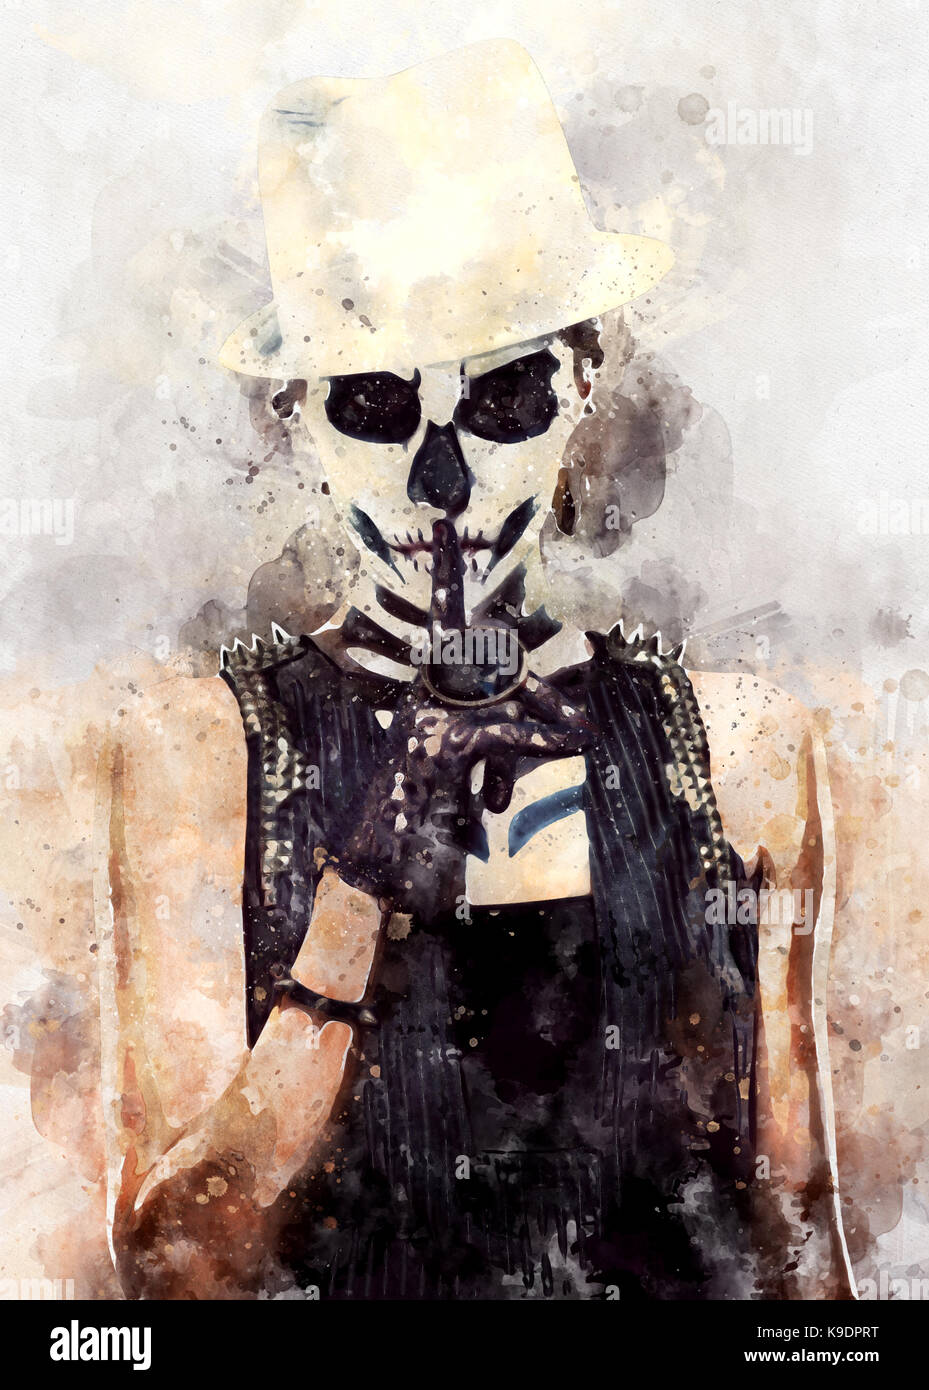 Digital watercolor painting of a woman with skeleton face art Stock Photo